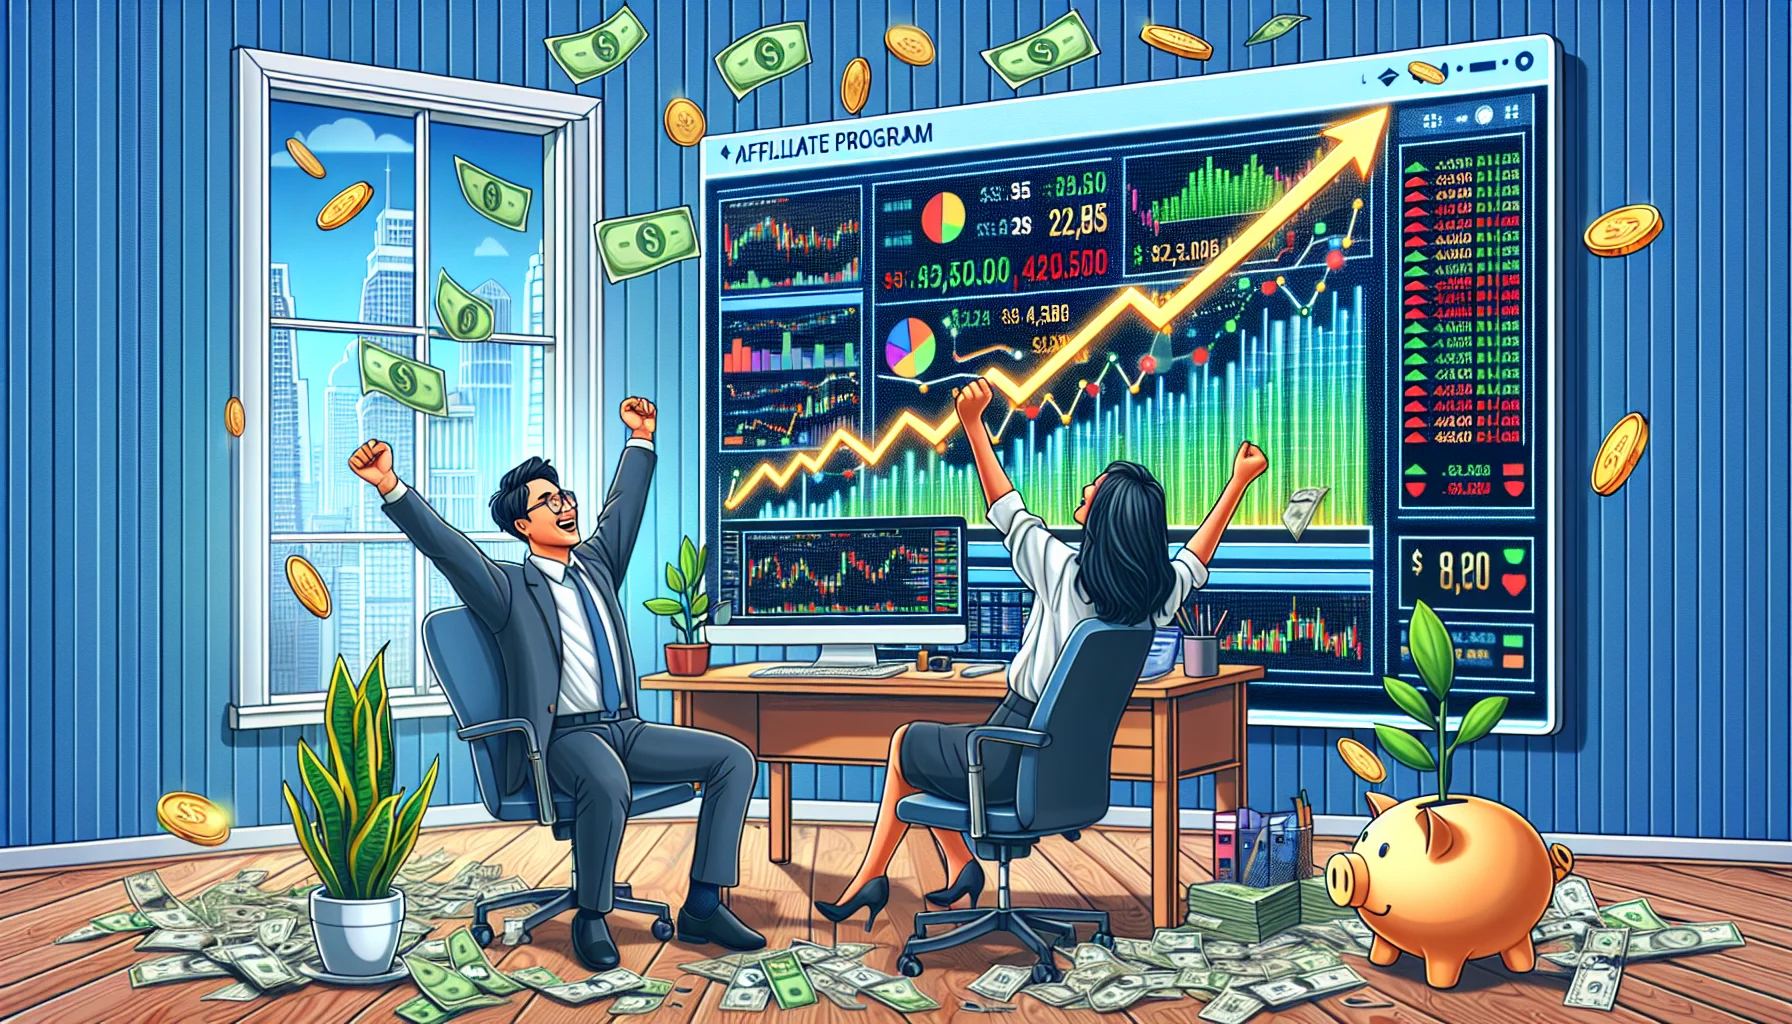 An entertaining and realistic image showcasing an anonymous online trading platform's affiliate program. Visualize a modern home office setup with a computer screen displaying an 'affiliate program' webpage filled with vibrant growing charts, stock symbols, and enticing cash symbols. Portray a joyful South Asian man and a Hispanic woman sitting in front of it, cheering for every rise in their virtual portfolio. Their desk is littered with a money plant signifying growth, a piggy bank sign, and scattered coins and bills indicating online monetary triumph.